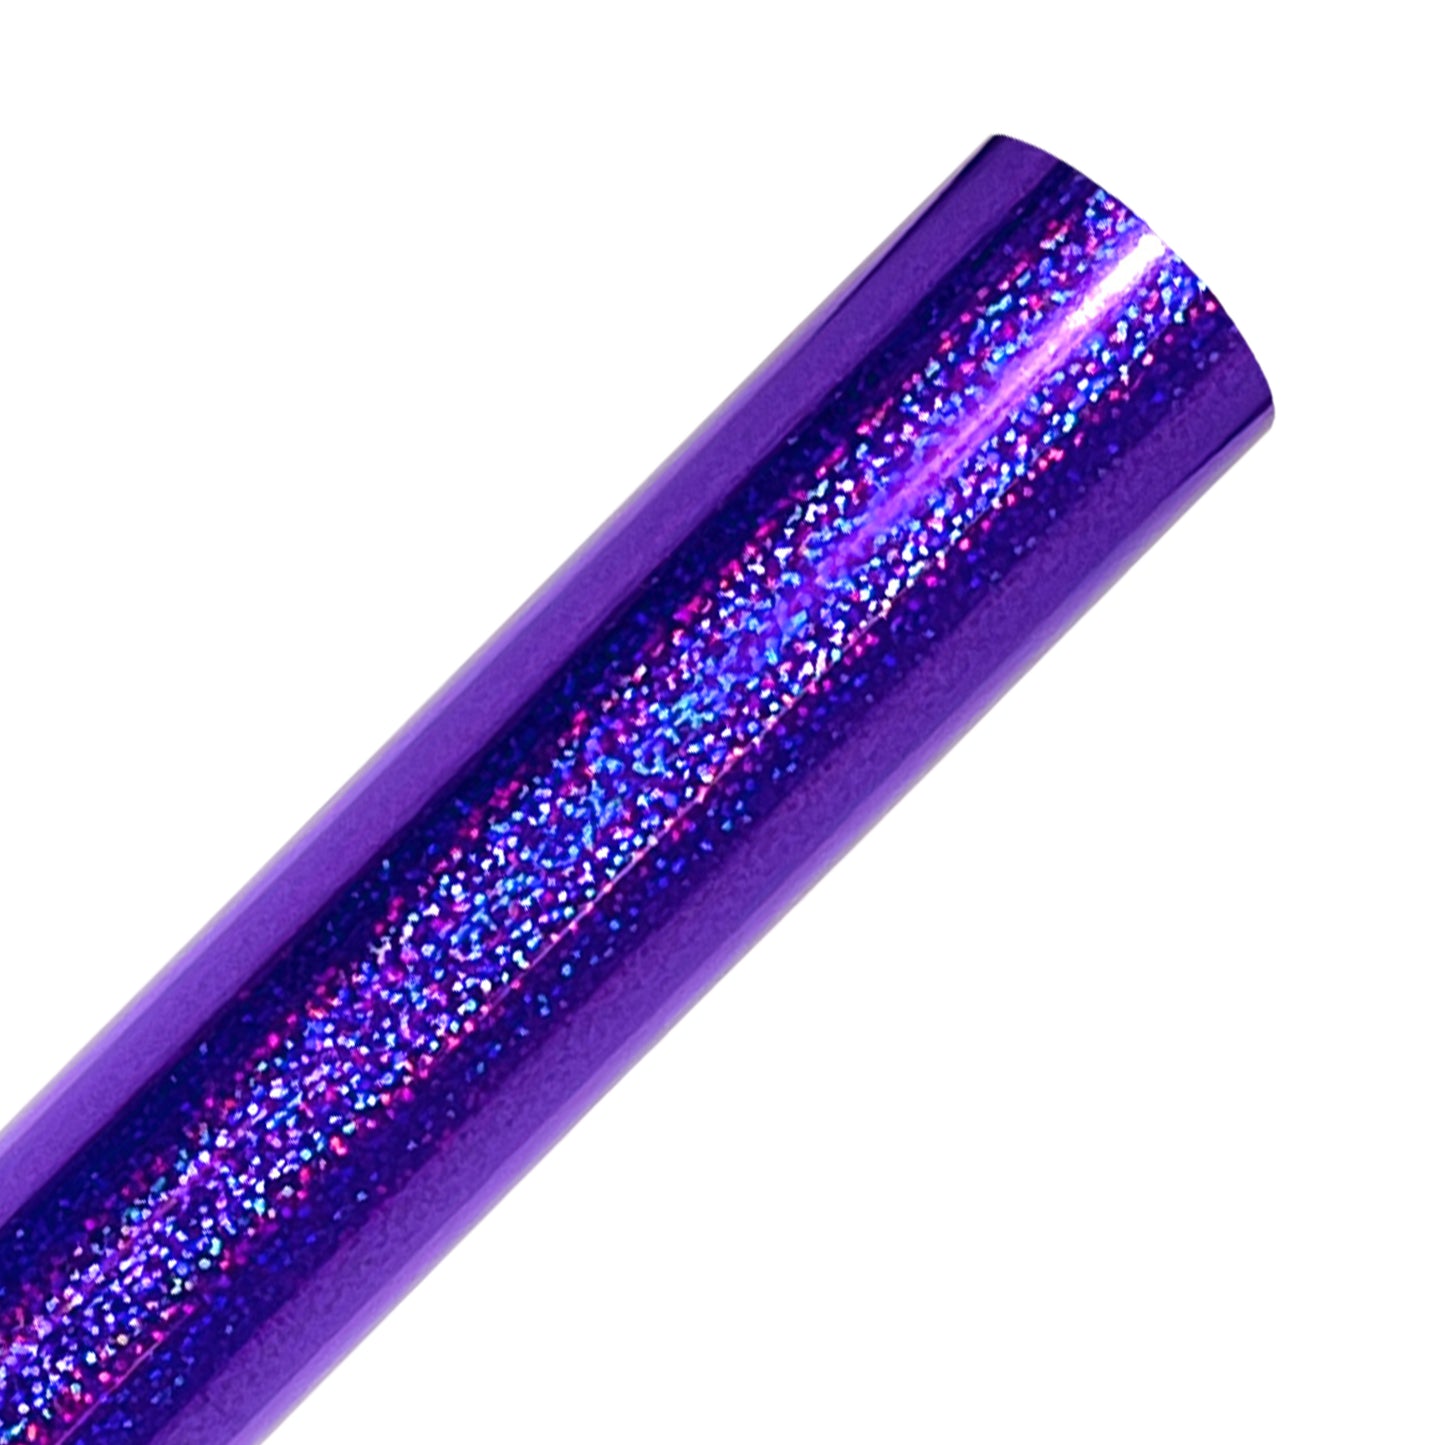 Purple Holographic Sparkle Adhesive Vinyl Rolls By Craftables